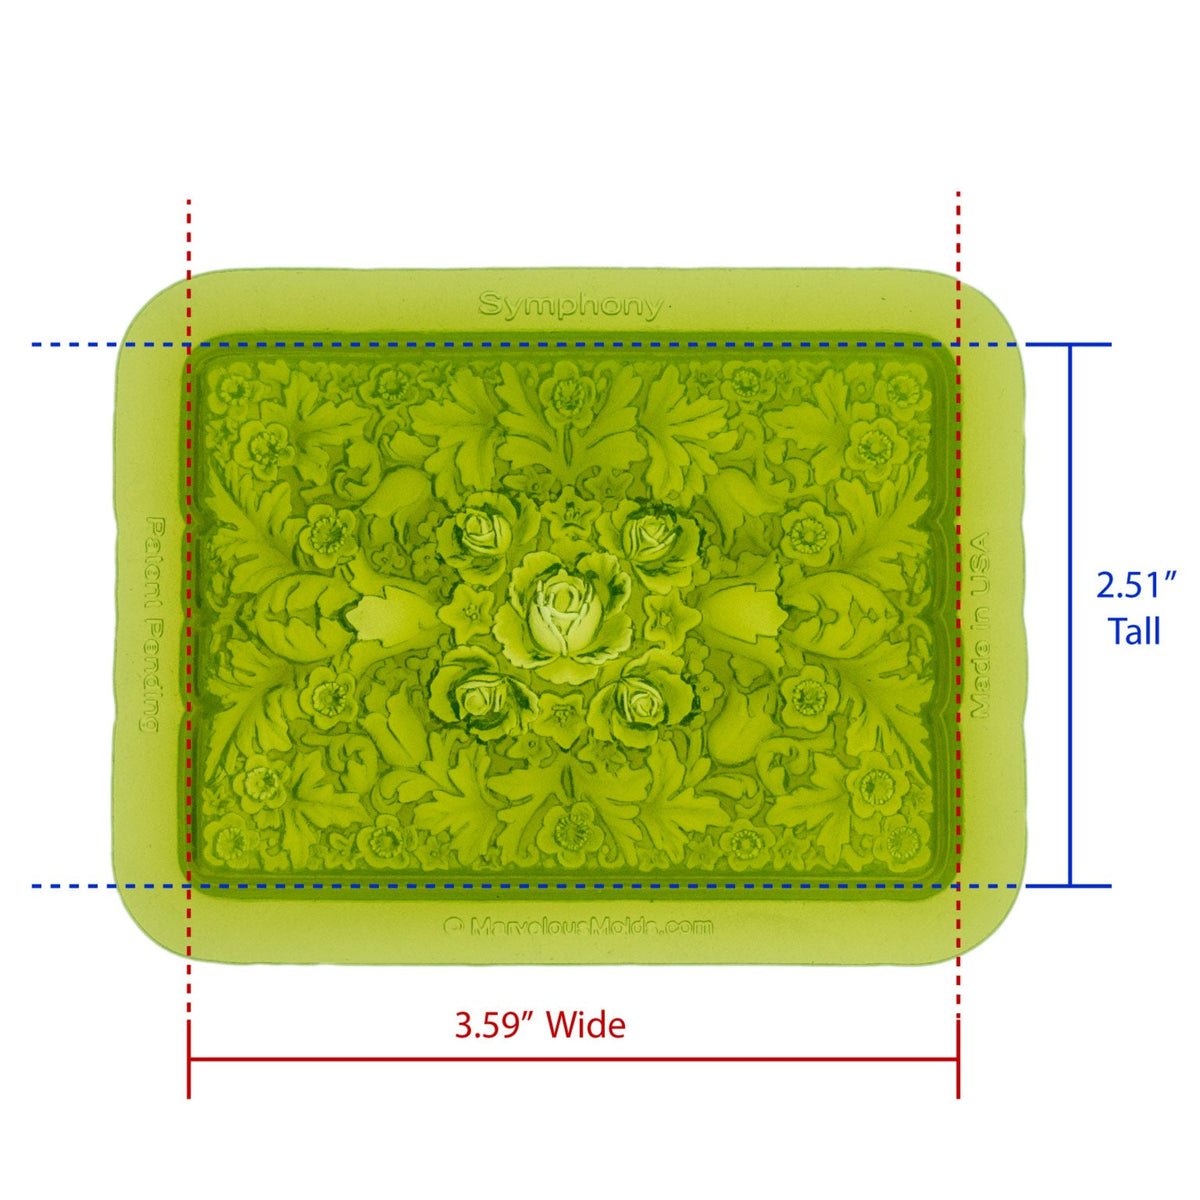 Symphony Floral Silicone Mold Cavity measures 3.59 inches Wide by 2.51 inches Tall, proudly Made in USA